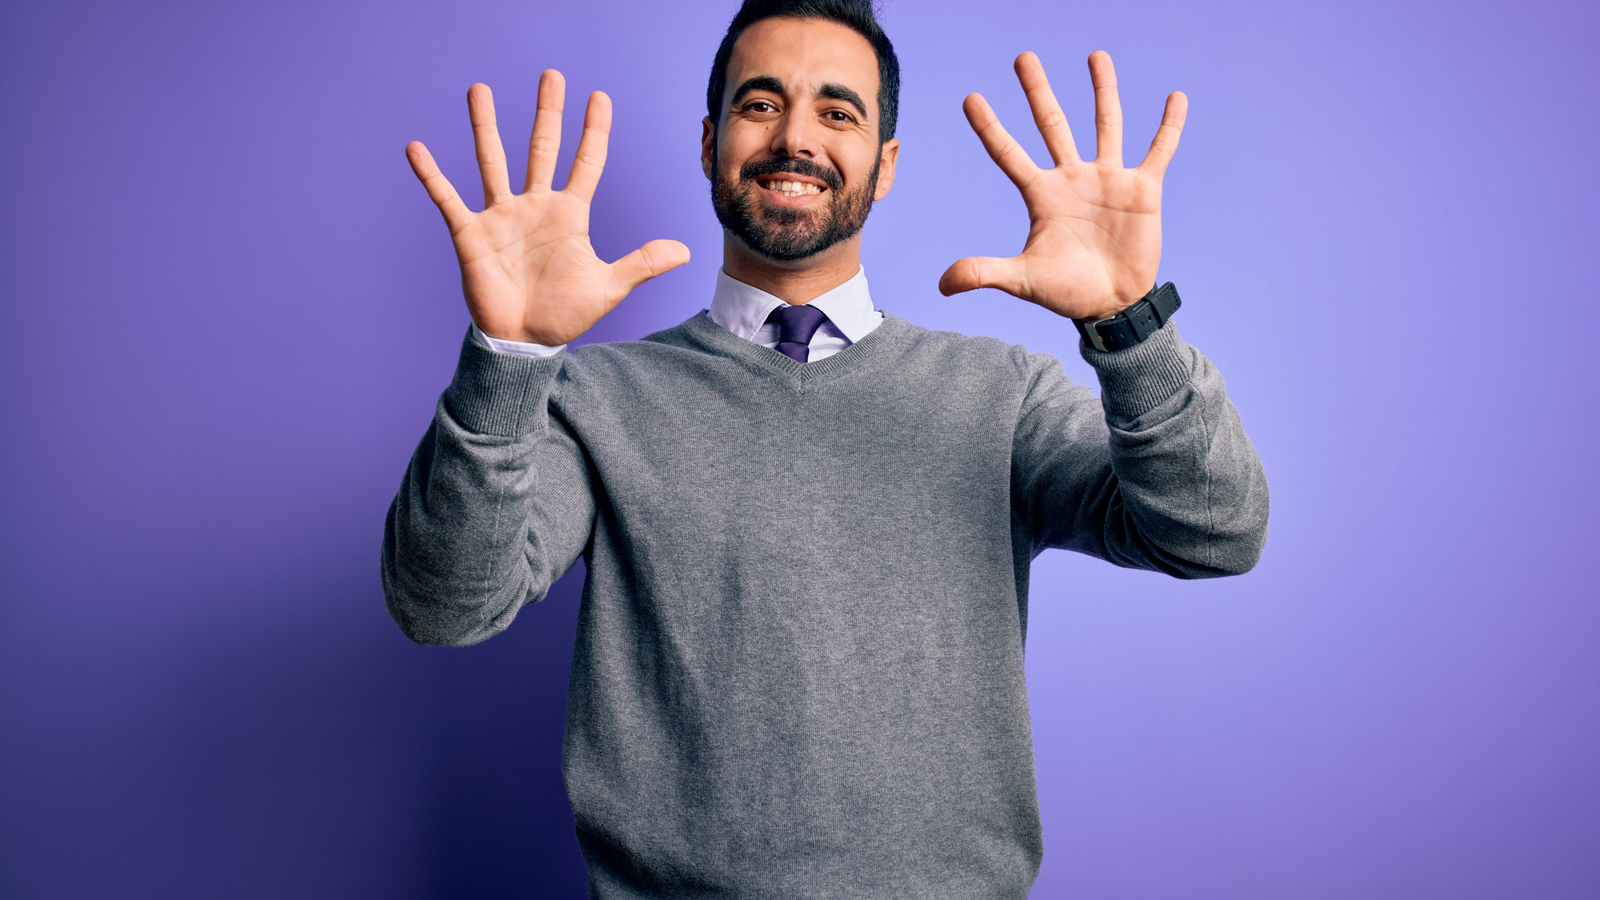 businessman wearing casual tie standing over isolated purple background showing and pointing up with fingers number ten